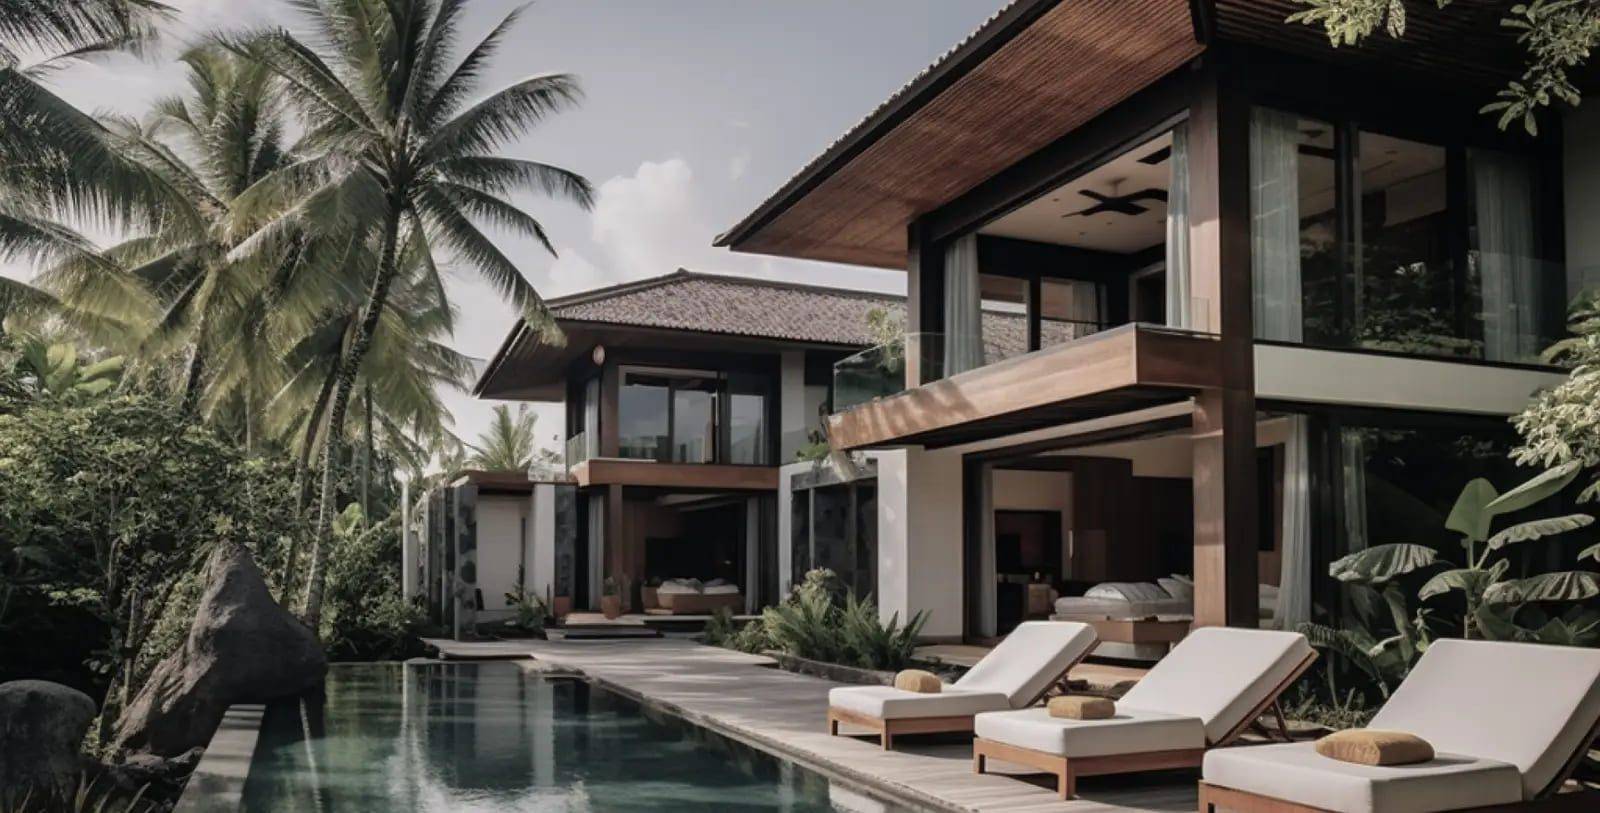 luxury villa in Bali investment opportunities. Optimize property tax